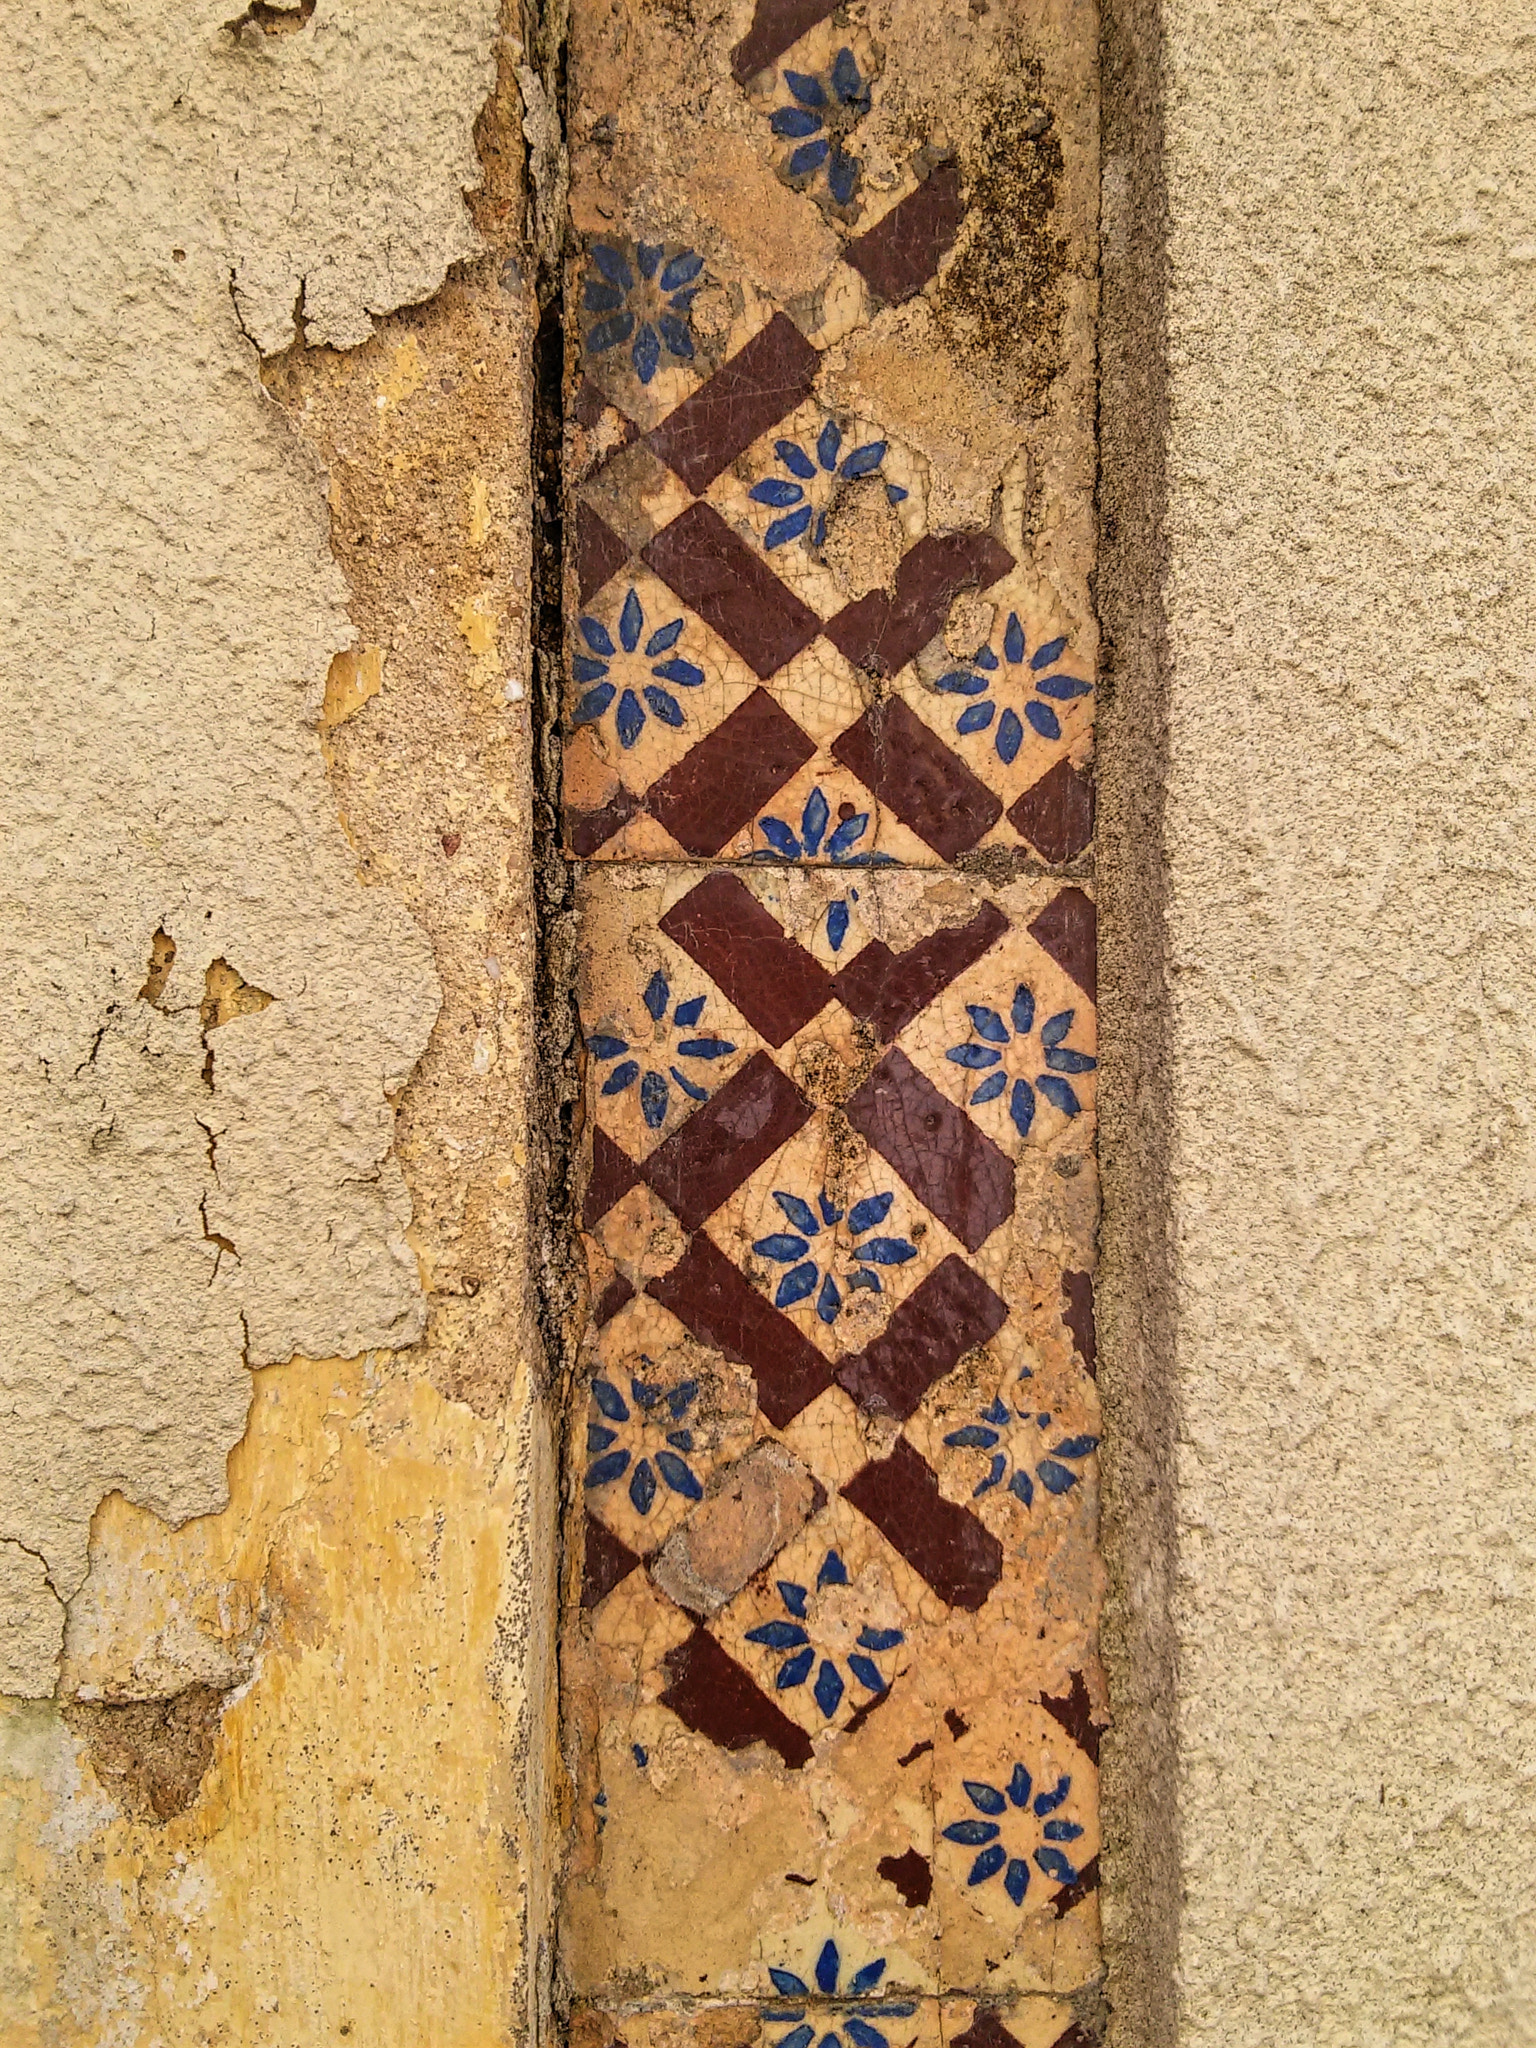 LG L90 sample photo. Decaying tiles photography